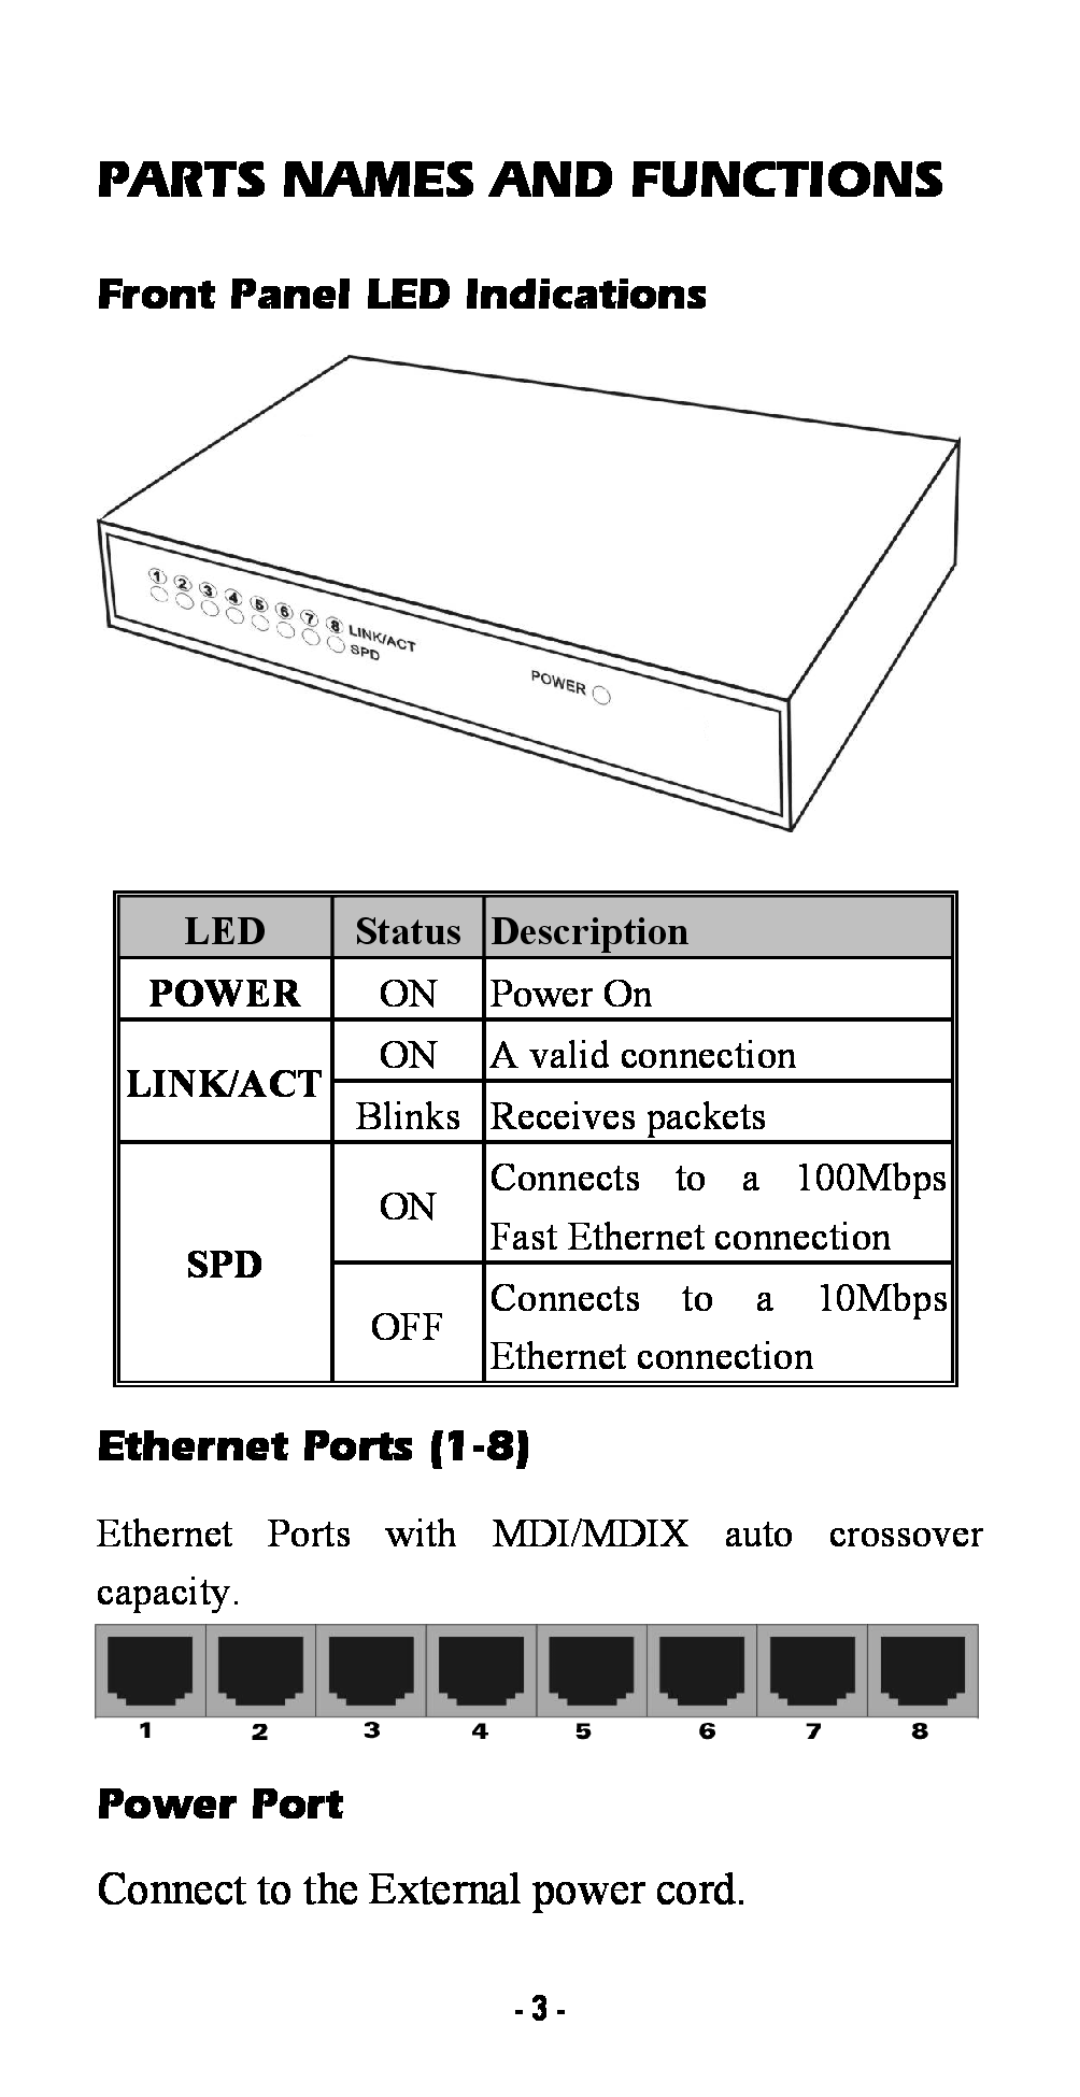 Abocom SW800AI Parts Names And Functions, Front Panel LED Indications, Ethernet Ports, Power Port, Status, Description 